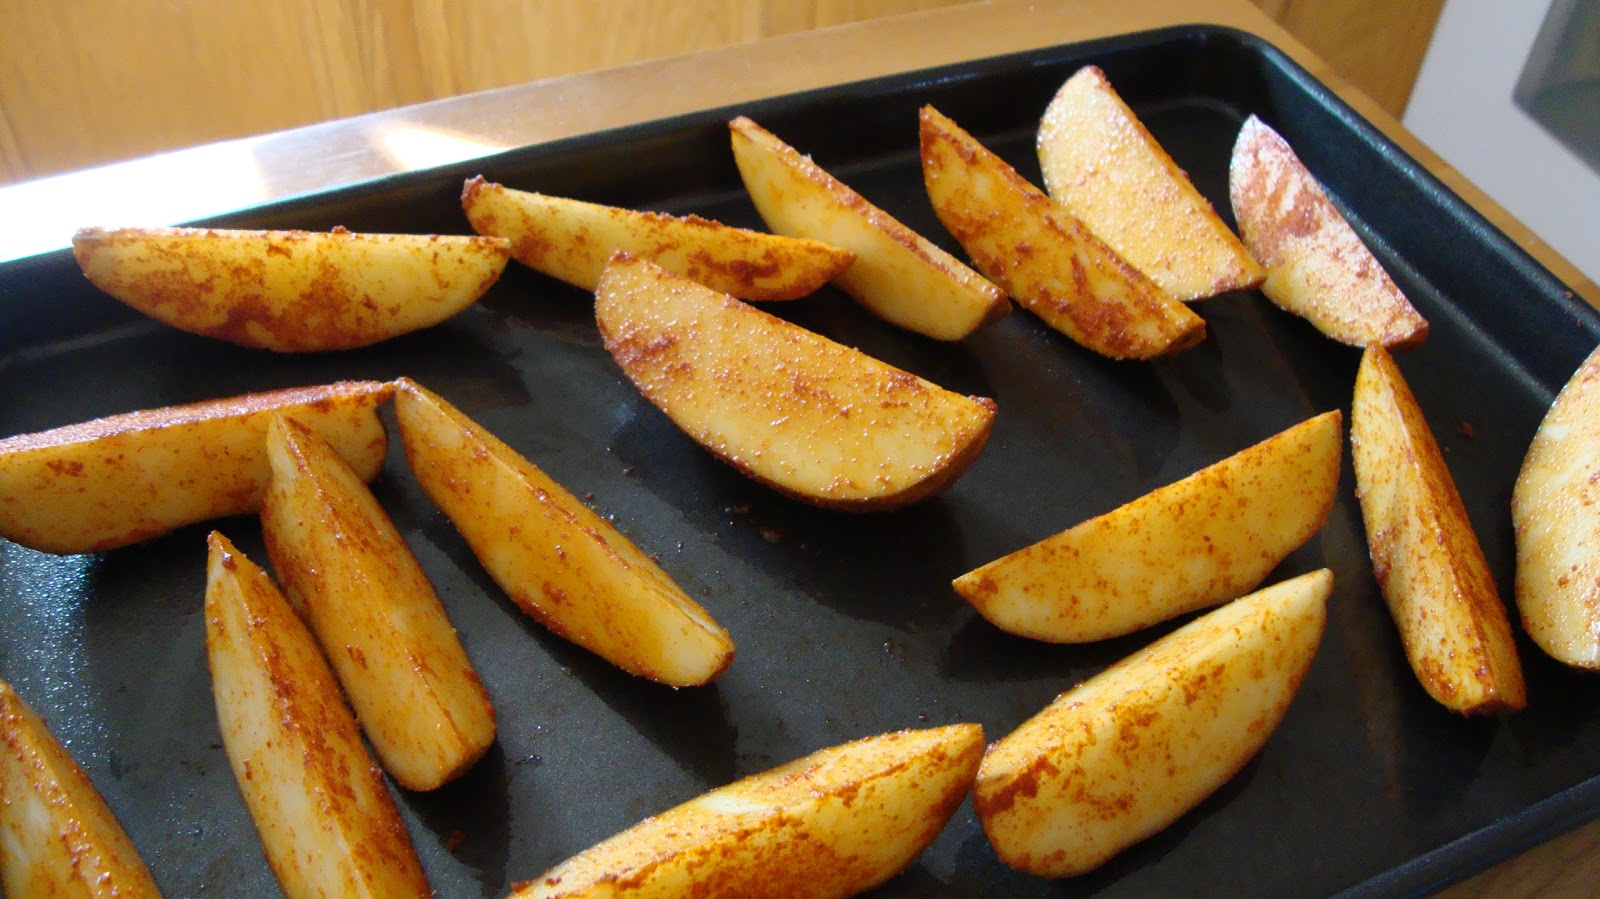 The Wednesday Baker: BAKED PAPRIKA FRIES